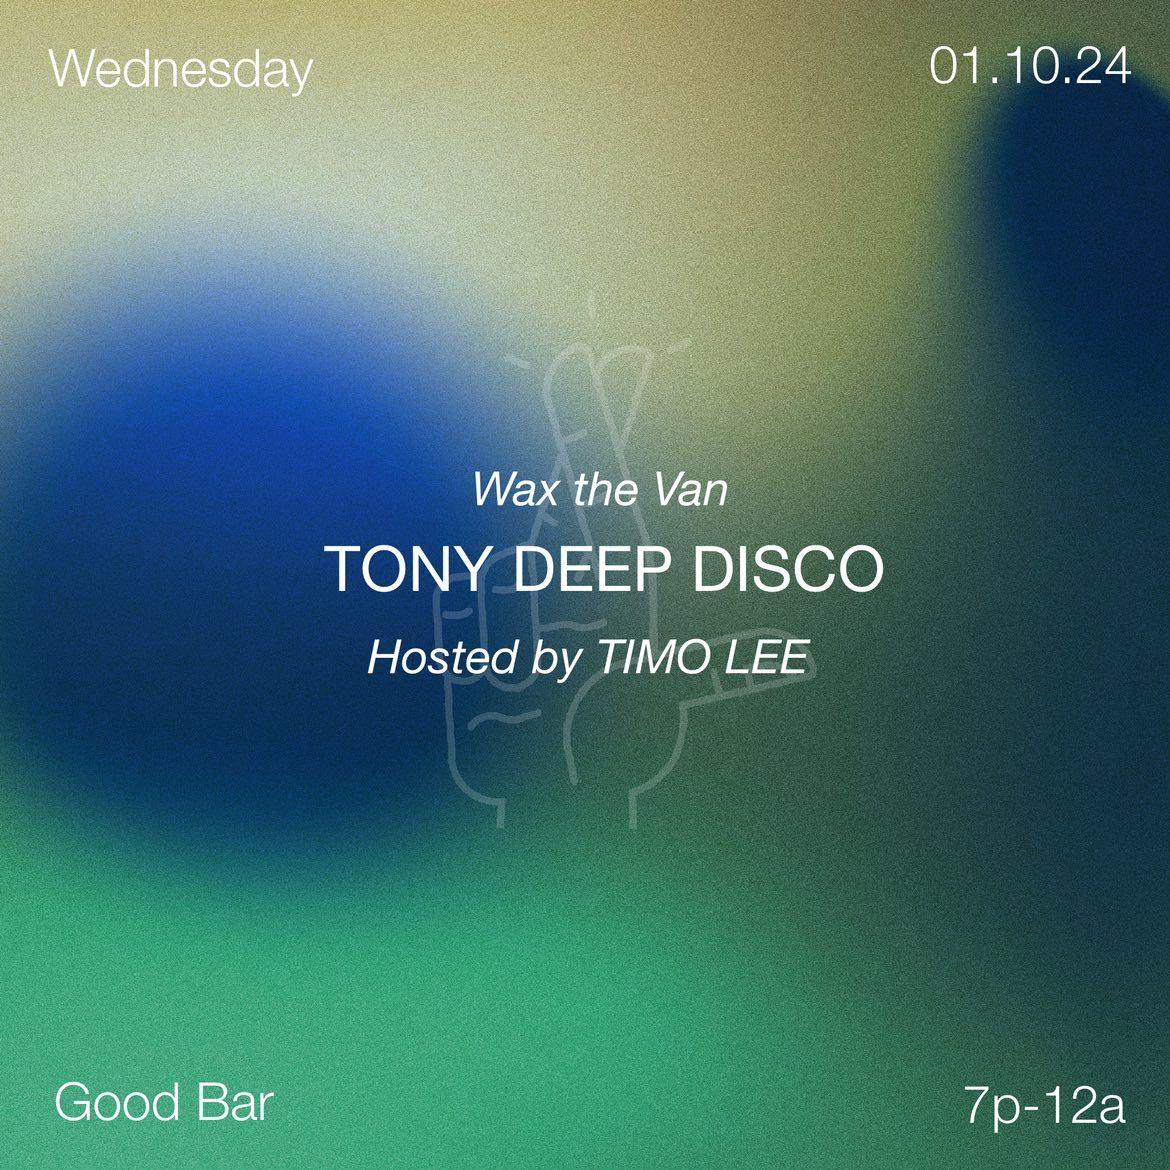 Wax the Van - TonyDeepDisco - Hosted by Timo Lee - Good Bar - フライヤー表